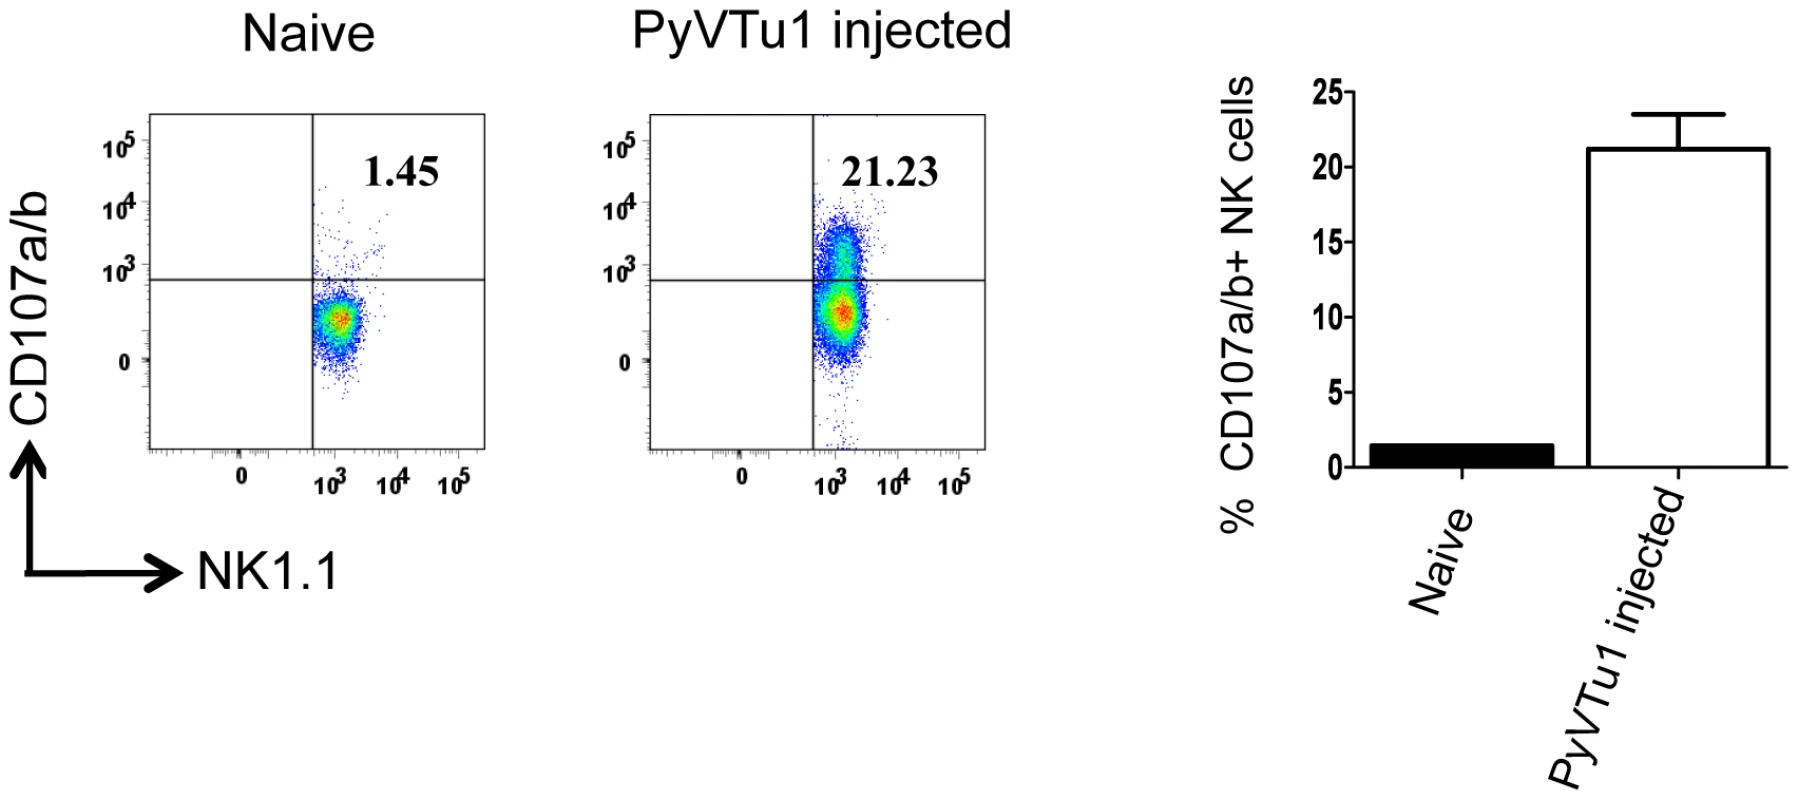 CD107 a/b staining of NK cells from PEC of TCRβ KO mice injected with PyVTu1 cells in-vivo indicates cytotoxic potential.